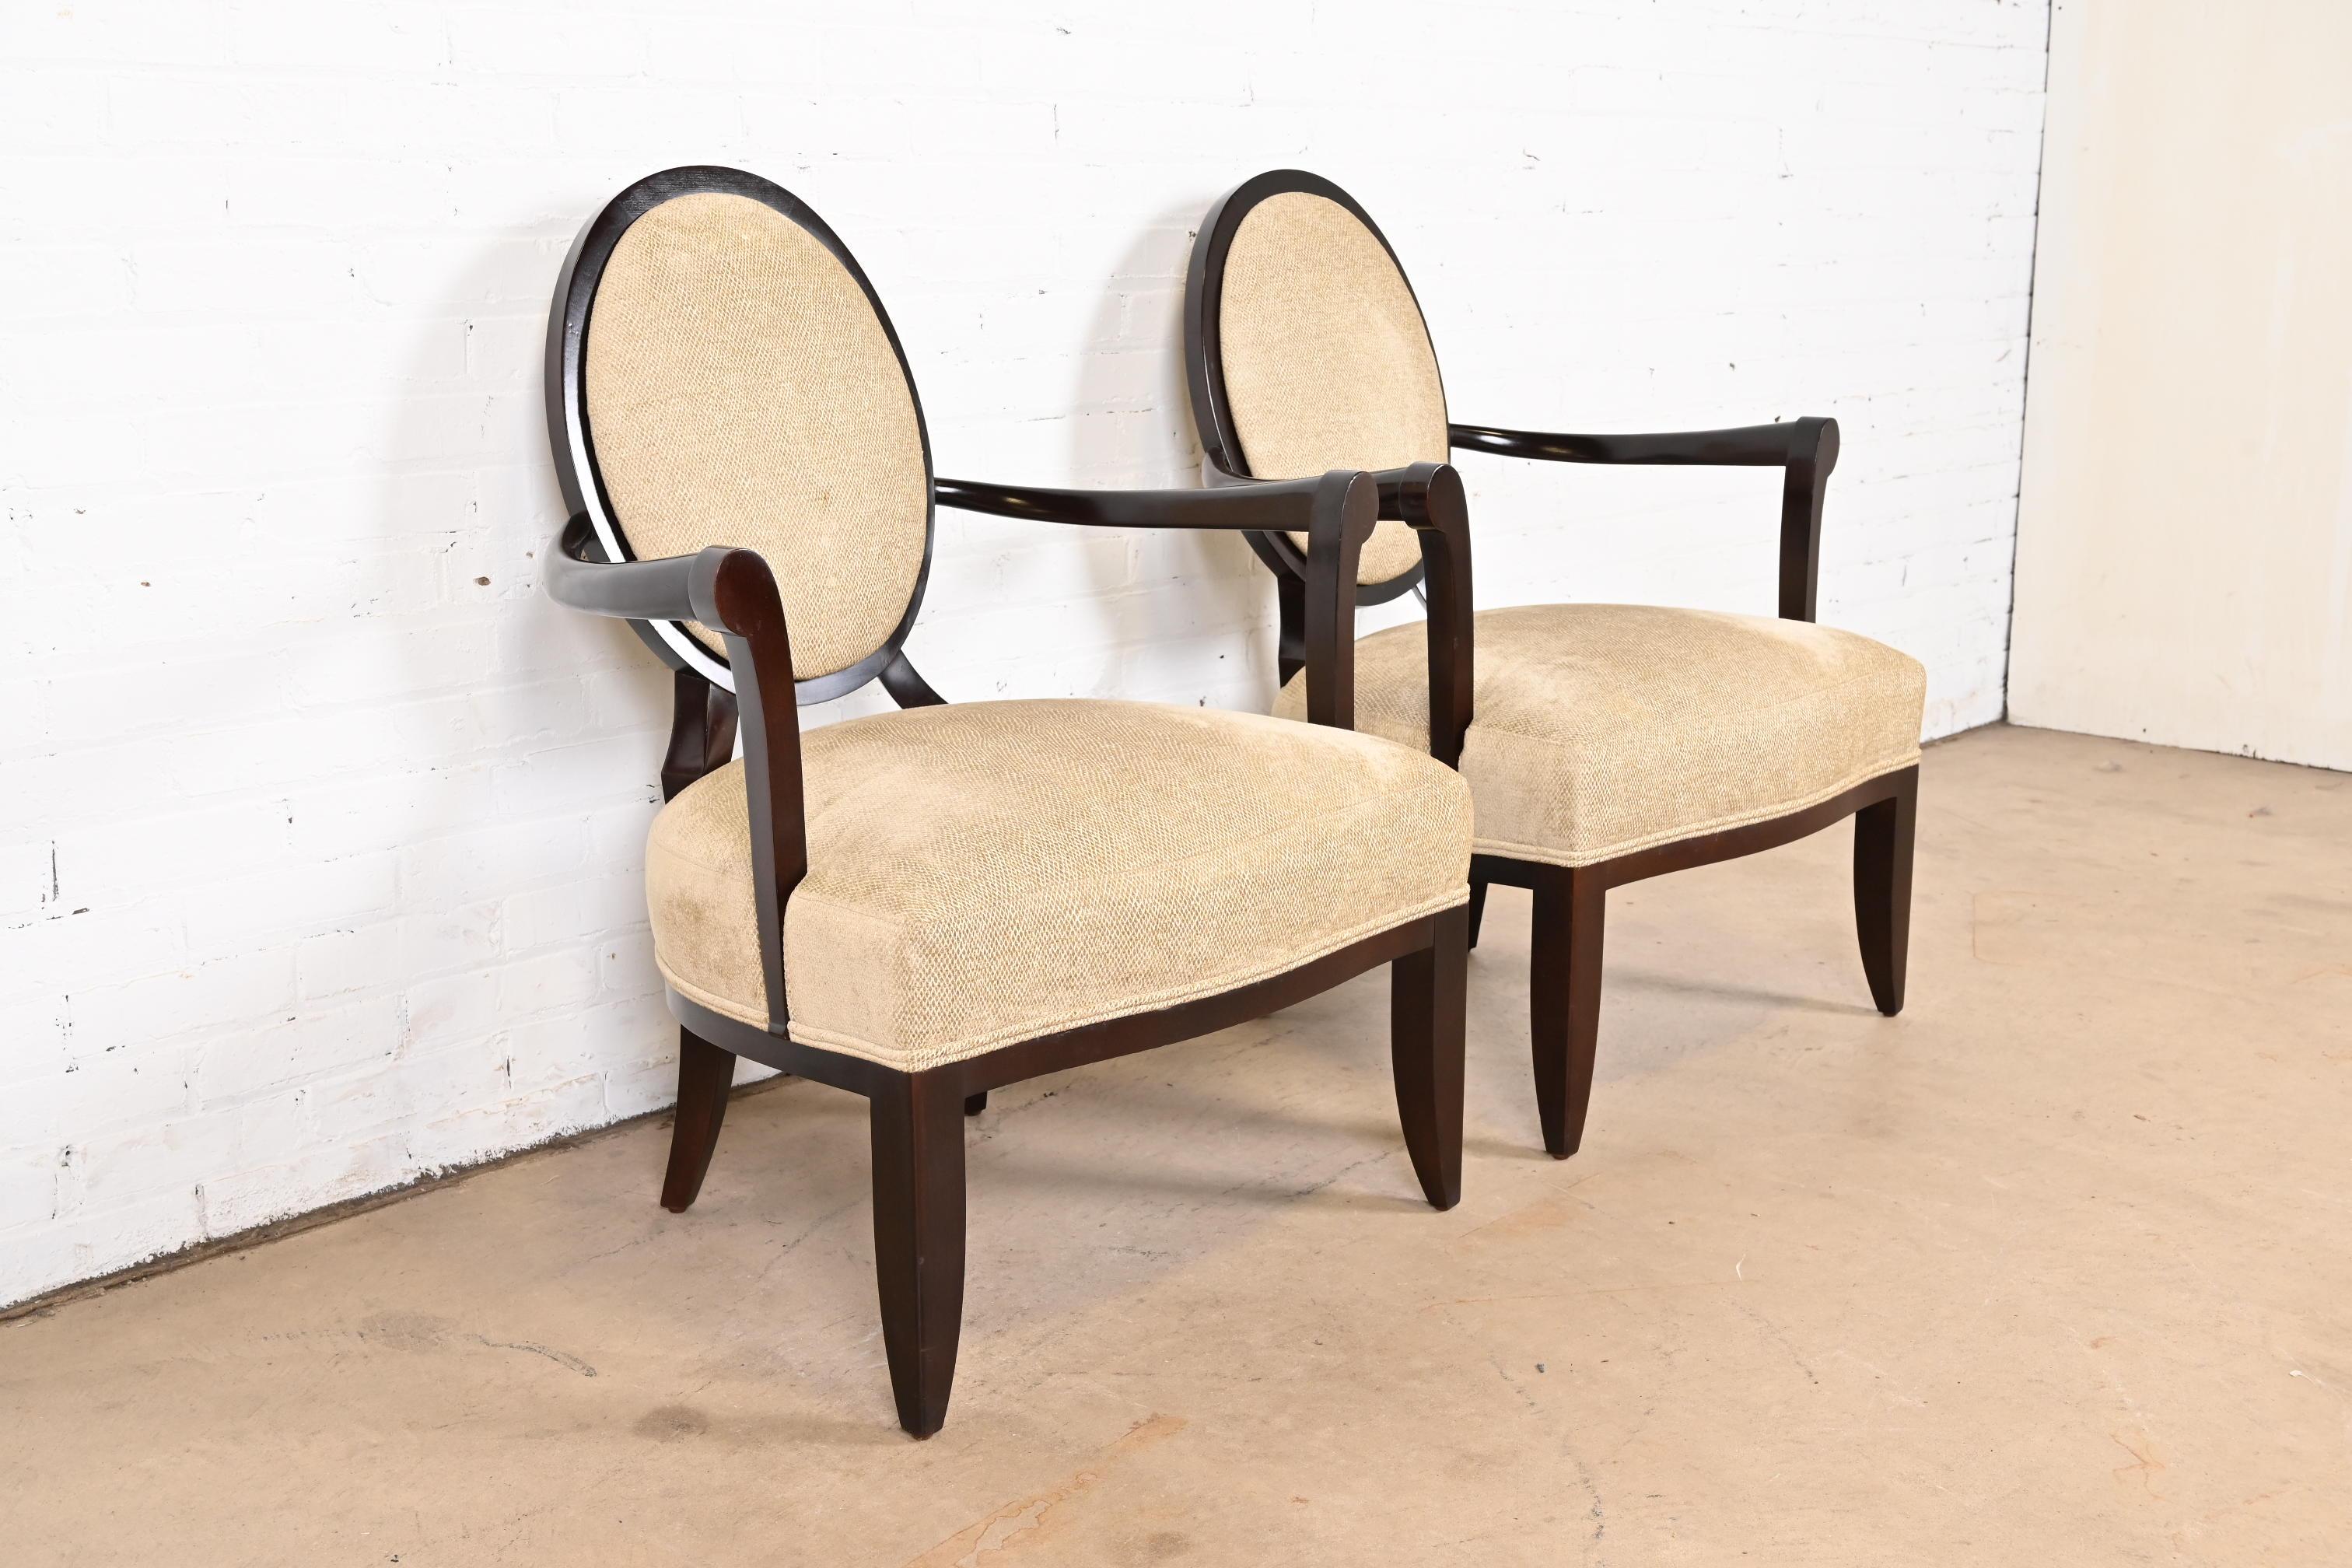 20th Century Barbara Barry for Baker Furniture Contemporary Oval X-Back Lounge Chairs, Pair